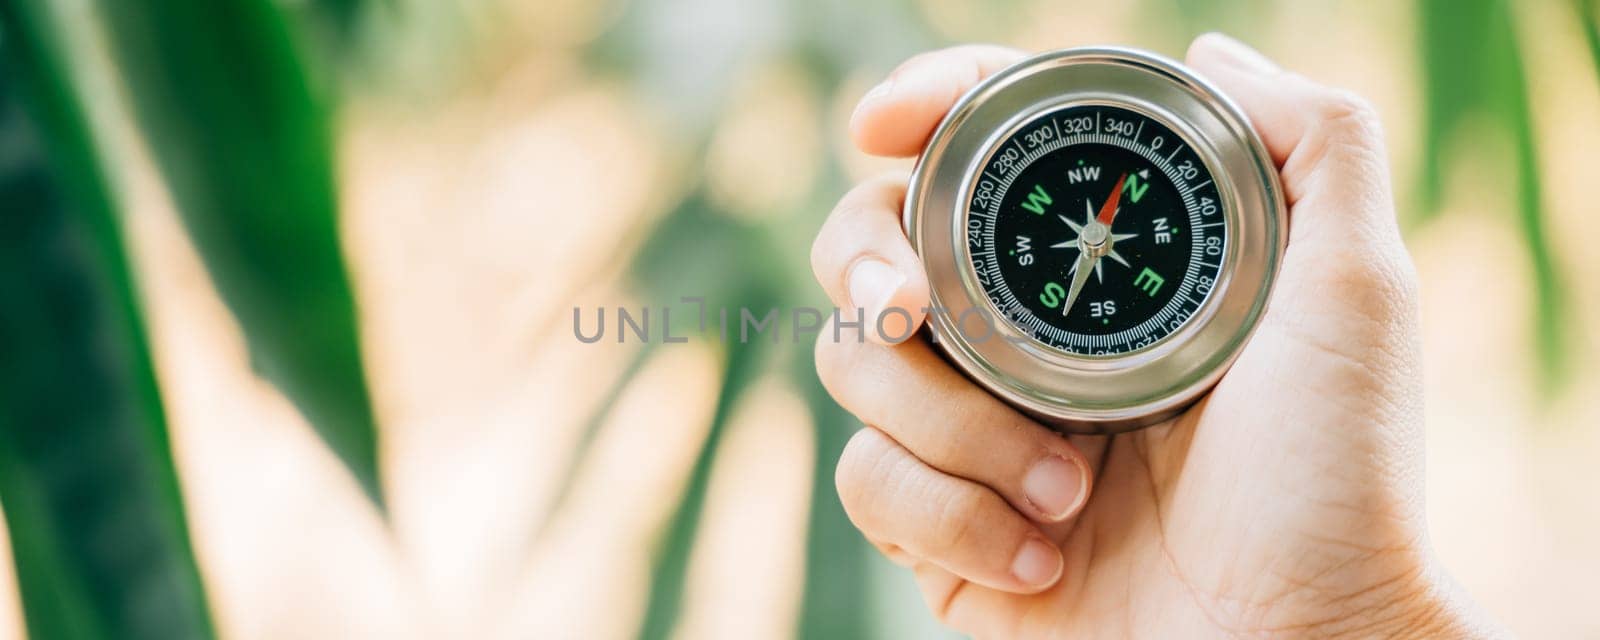 A traveler holding a compass in a park searches for guidance and direction amidst nature beauty. The compass in the woman hand signifies exploration and a journey to find her path. by Sorapop